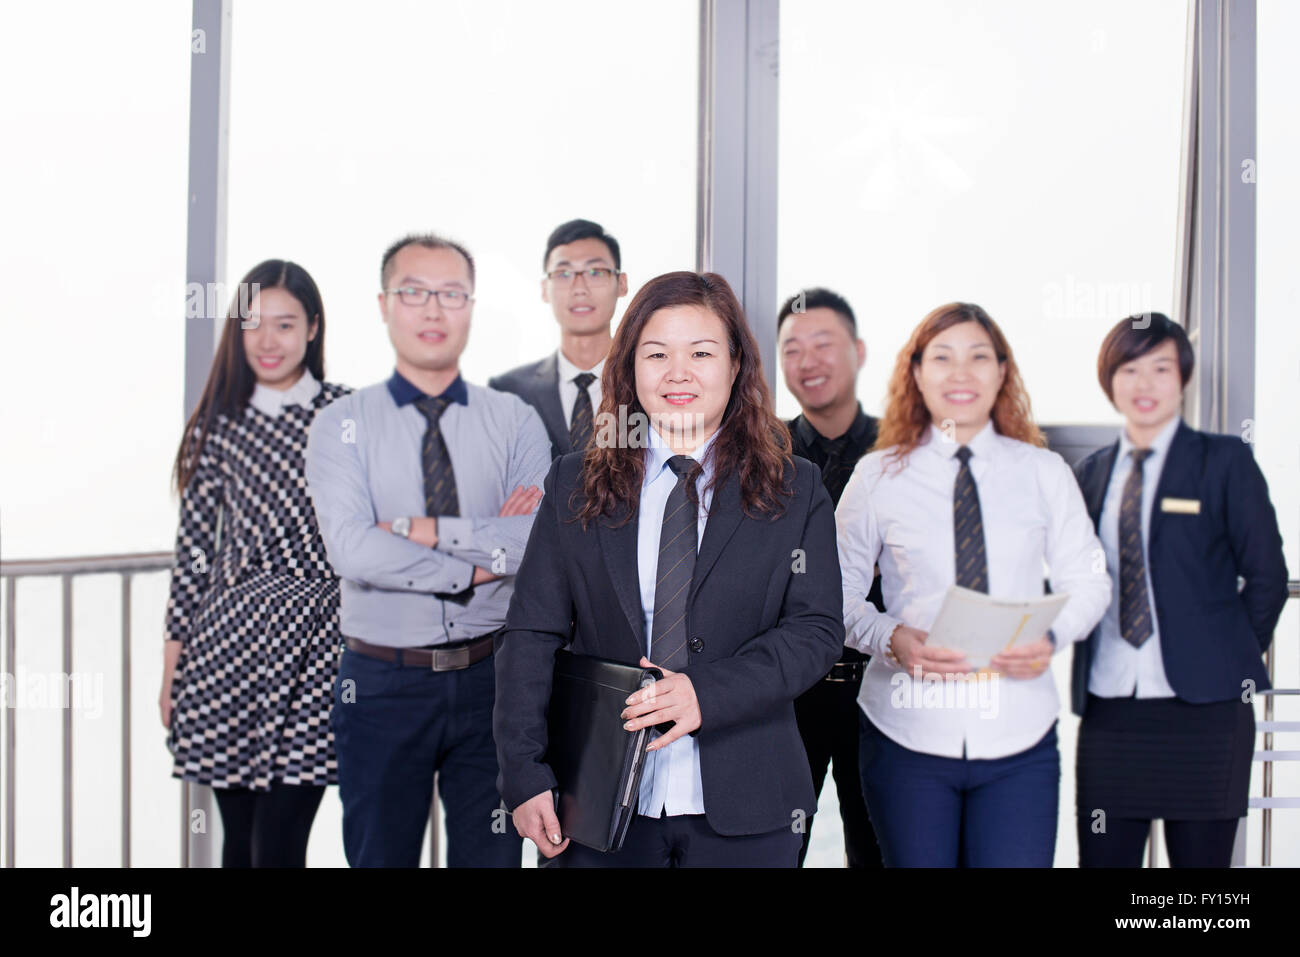 Confident business men and women.slightly shallow depth of field. Stock Photo